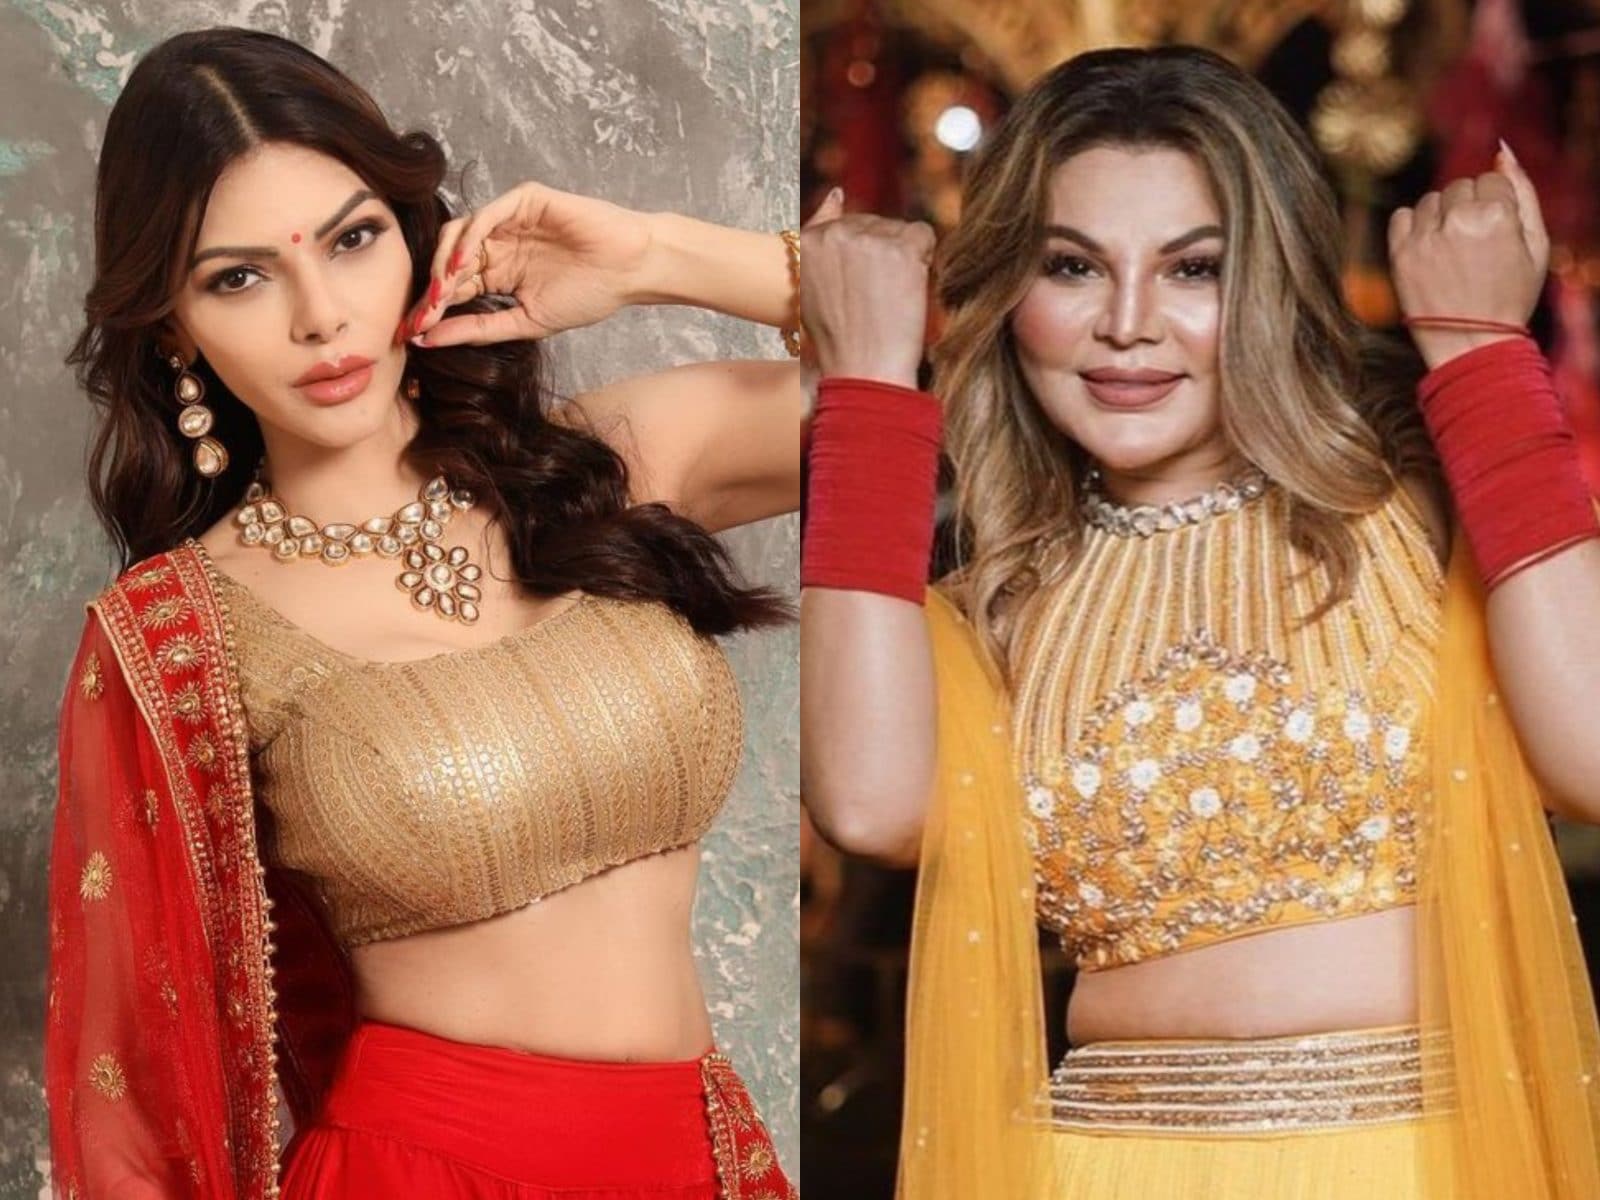 Priyanka Chopra Full Sexy Video Open - Sherlyn Chopra Asks Rakhi Sawant To Get Aside, Says 'My Fight Is Not With  Her' - News18